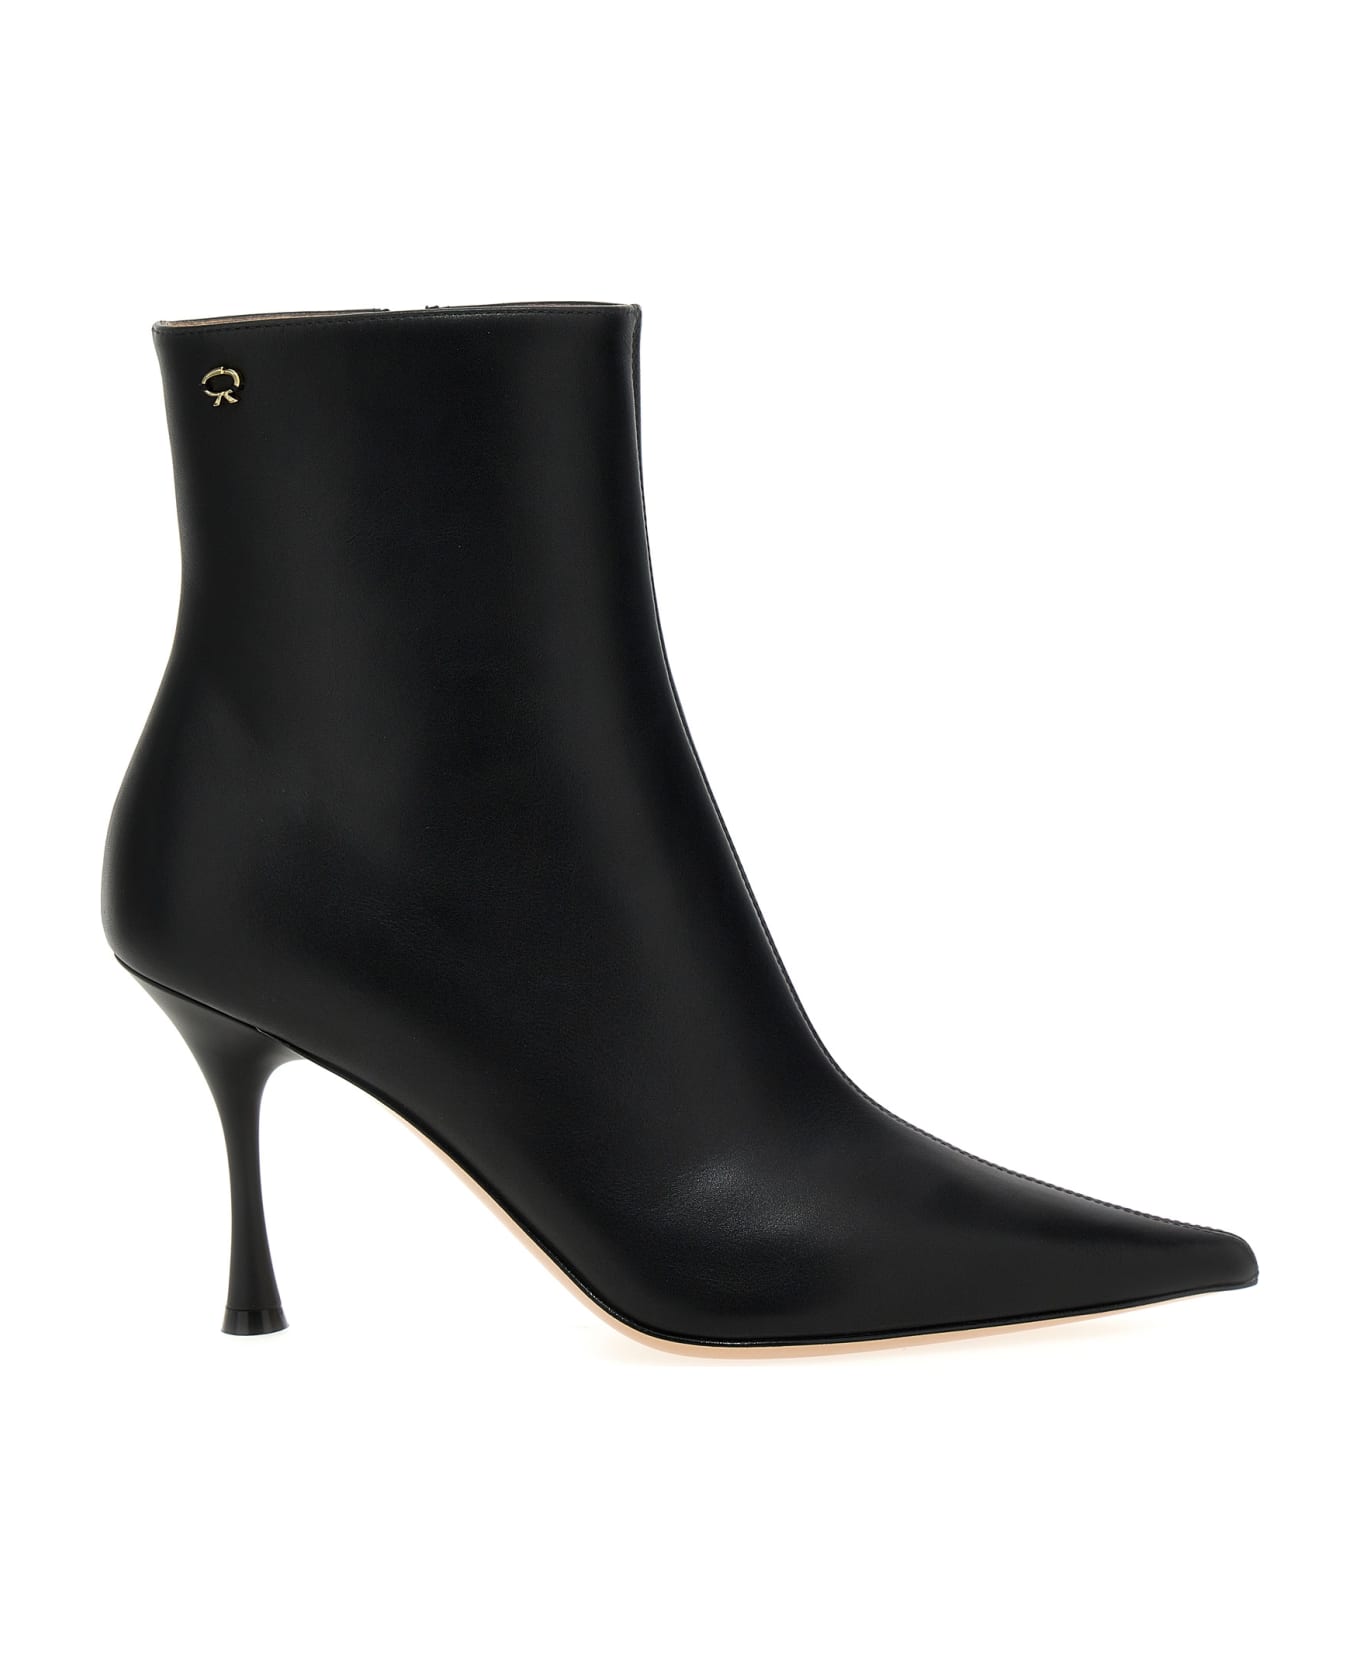 Gianvito Rossi Leather Ankle Boots - Black  